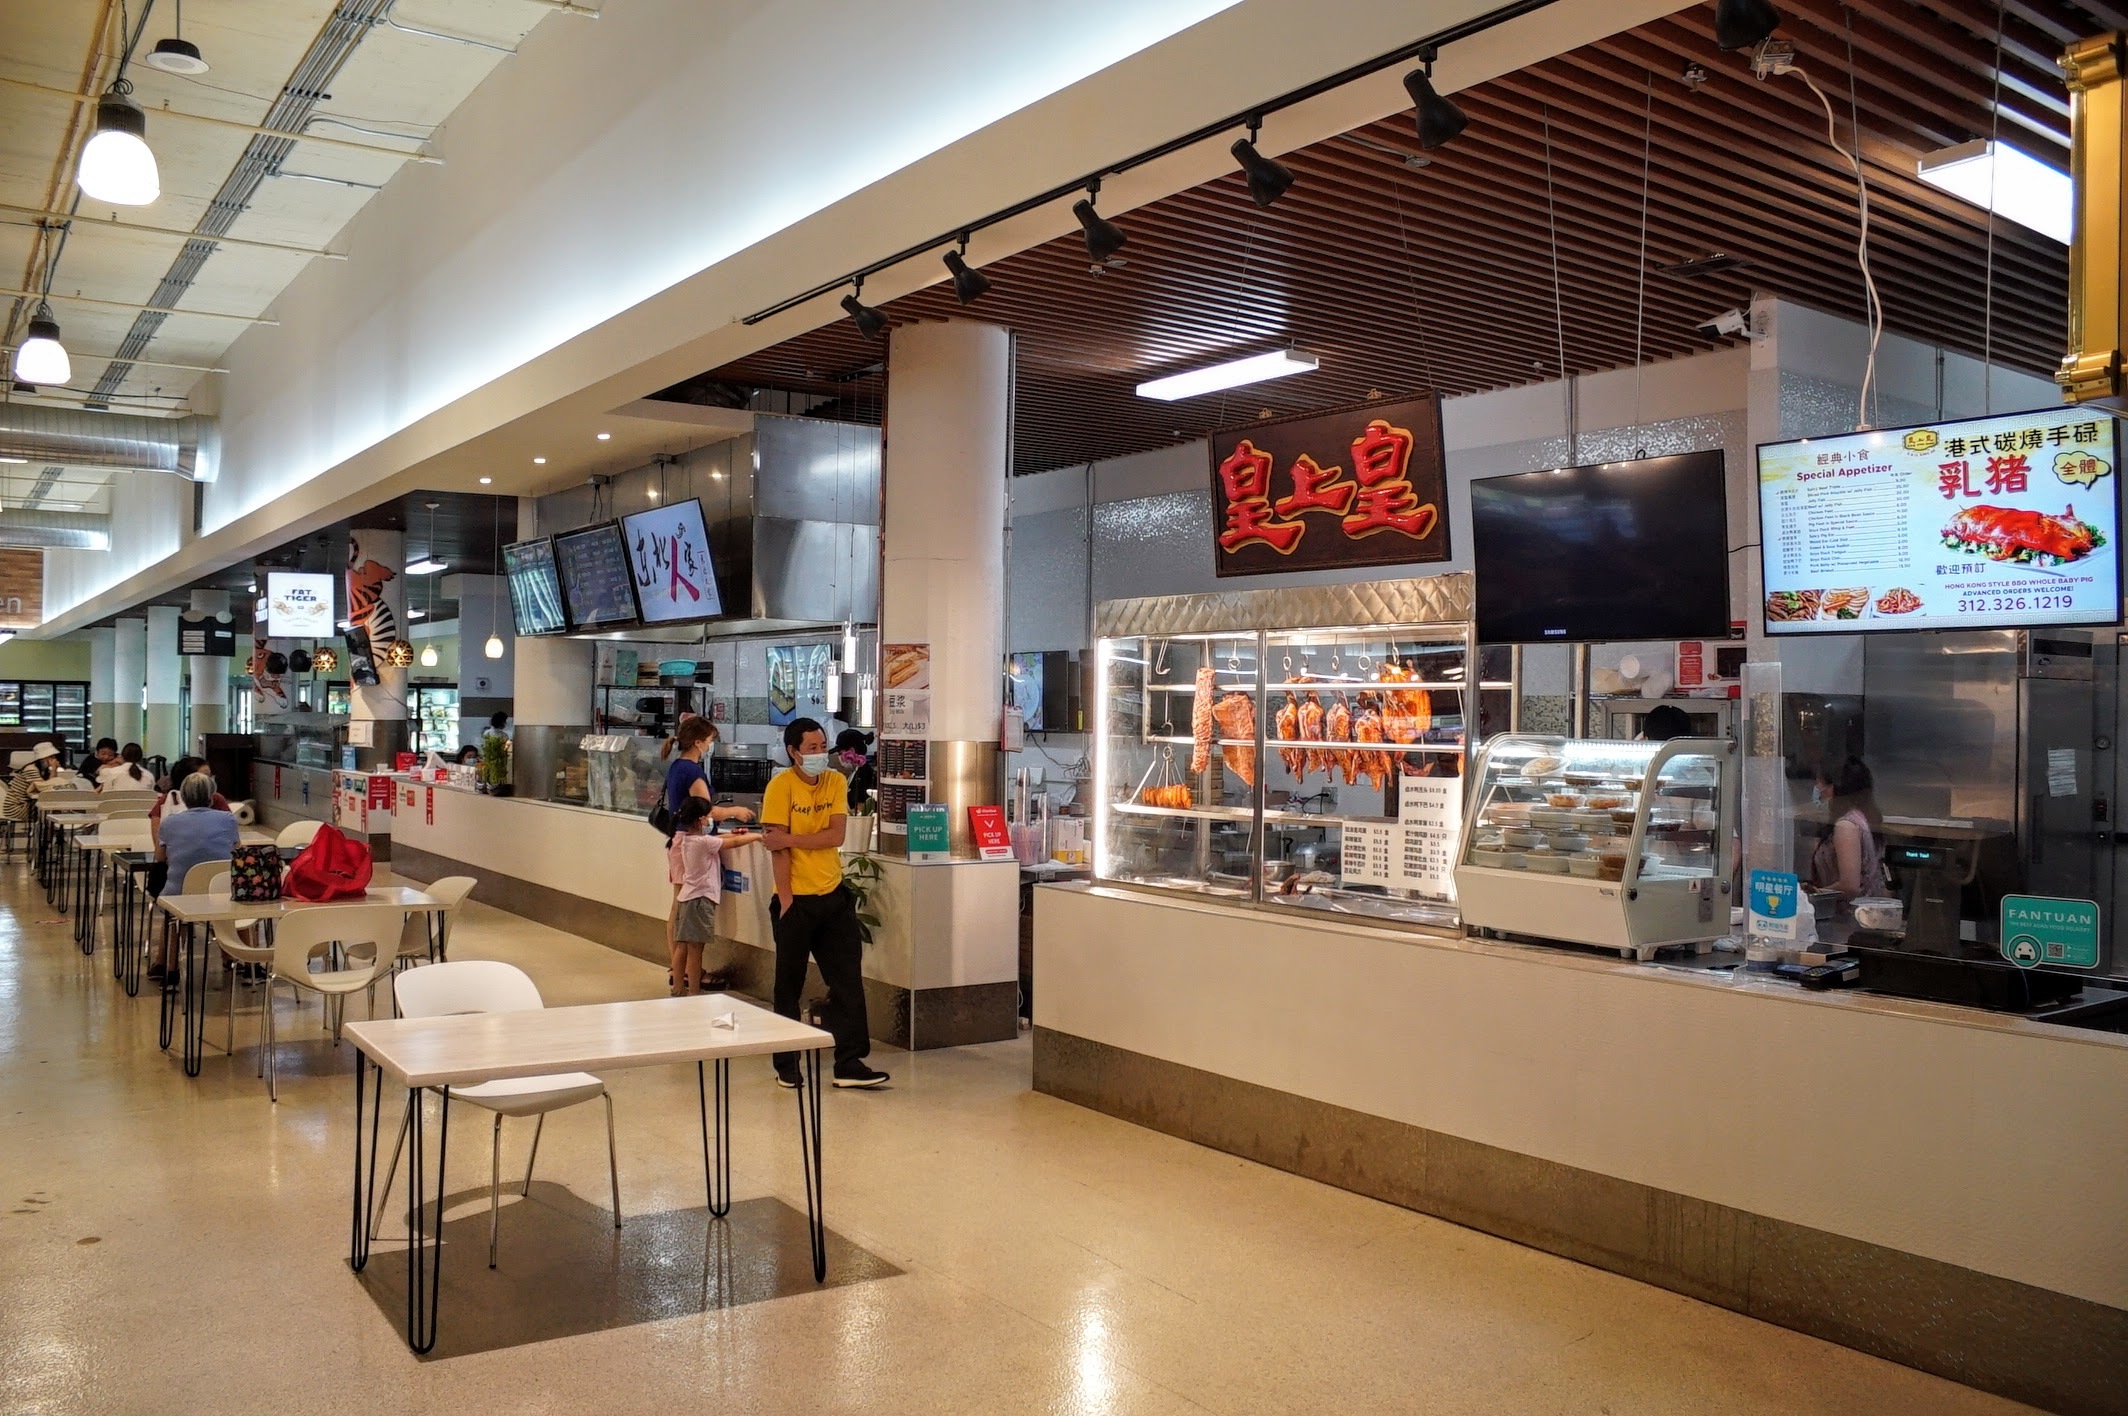 Here s a look inside the massive food court at 88 Marketplace